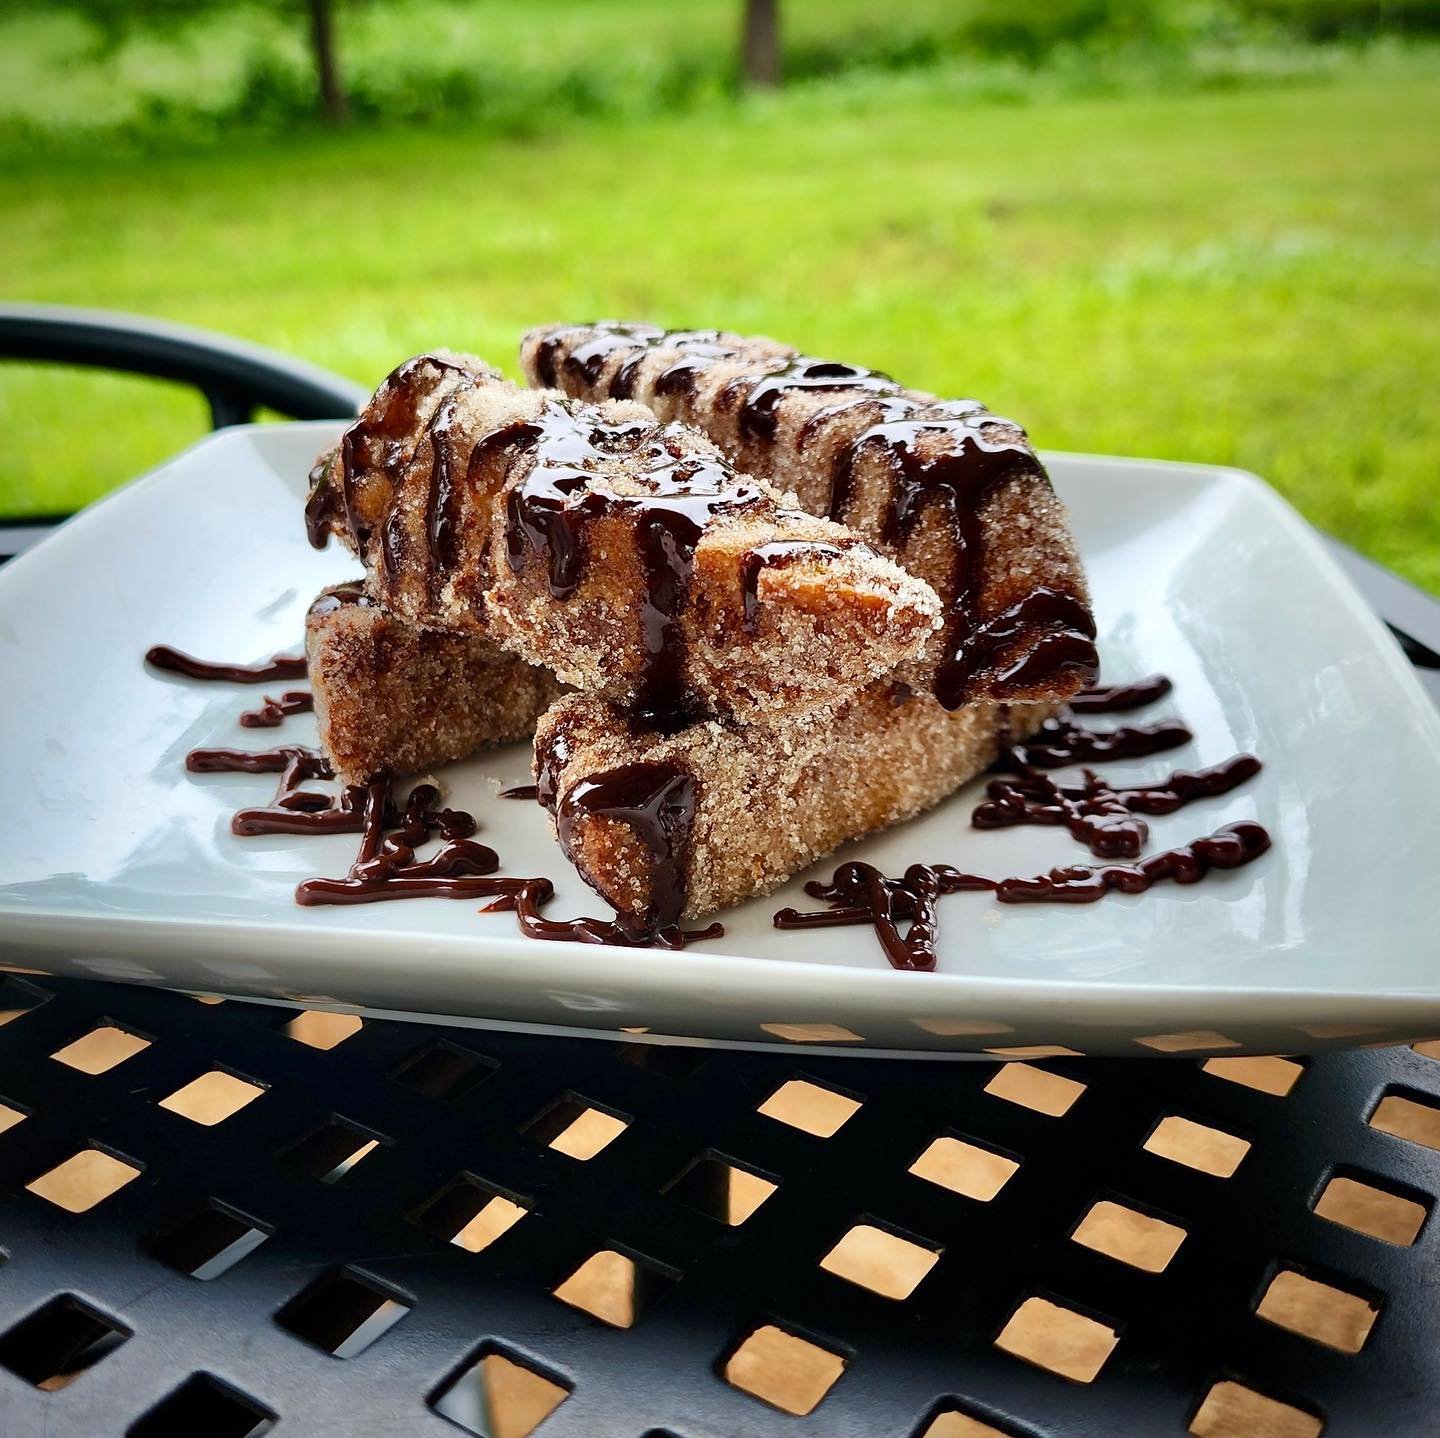 Happy Cinco De Mayo everyone! This weekend we are celebrating the holiday with our legendary Churro French Toast! Our French toast sliced into sticks, fried extra crispy, coated in cinnamon sugar and drizzled with spiced chocolate sauce. It&rsquo;s c